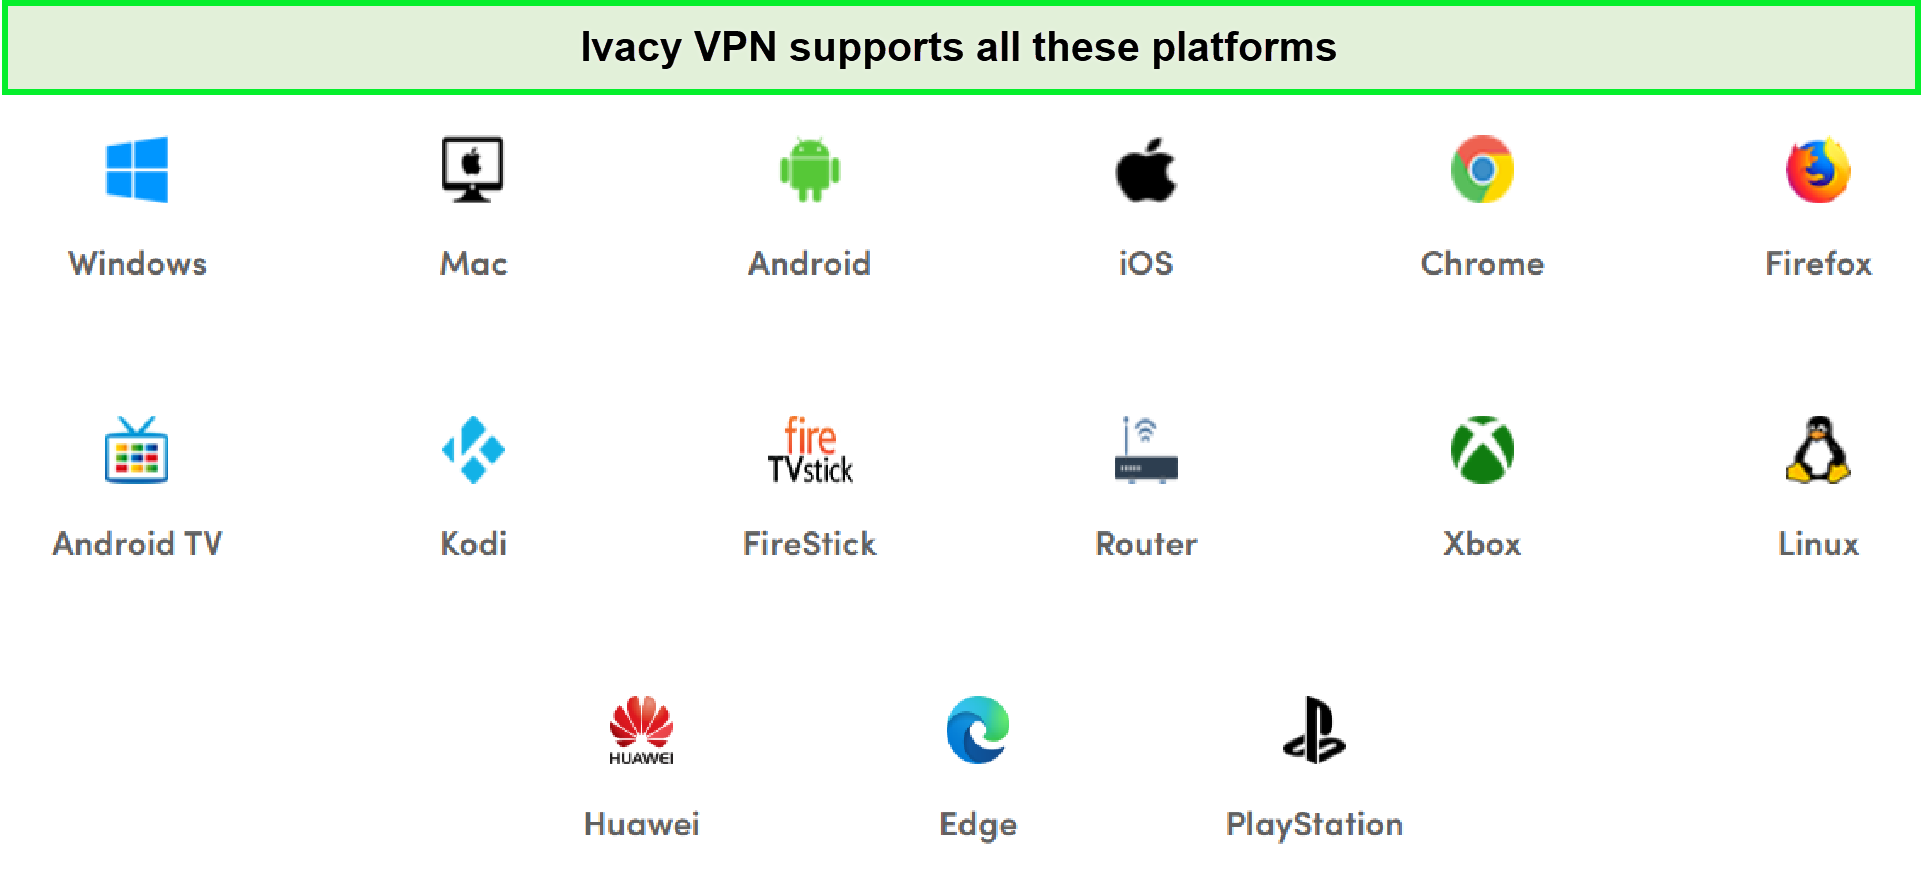 ivacy-device-compatibility-in-Germany